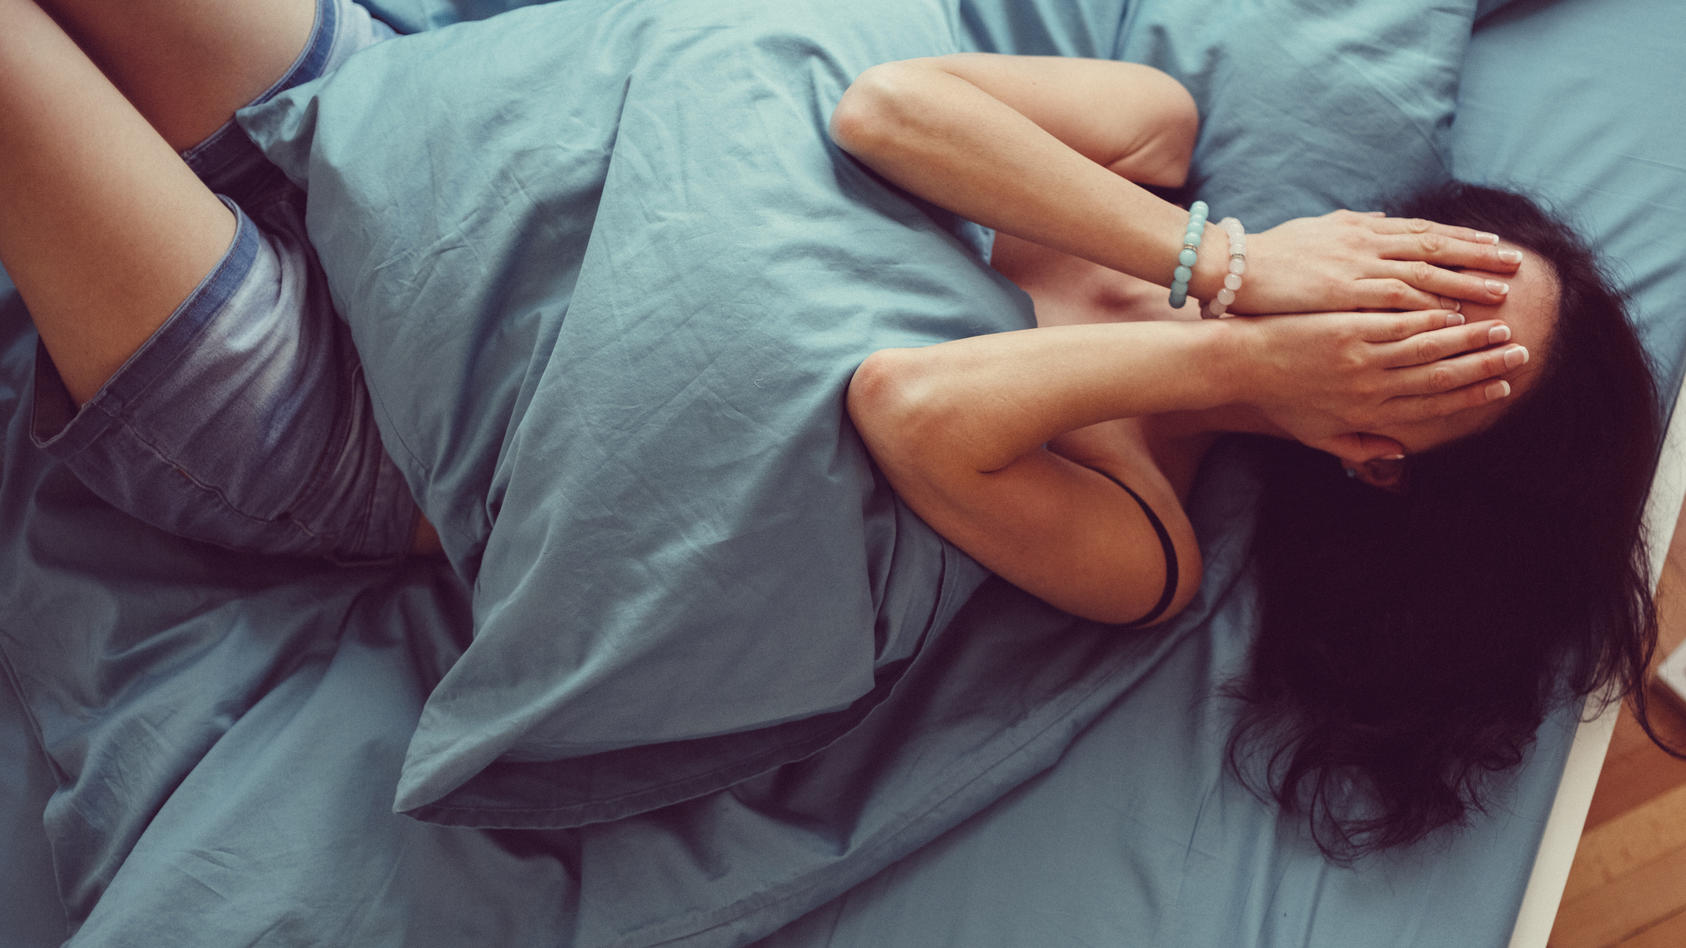 Depressed woman in bed with hands on face